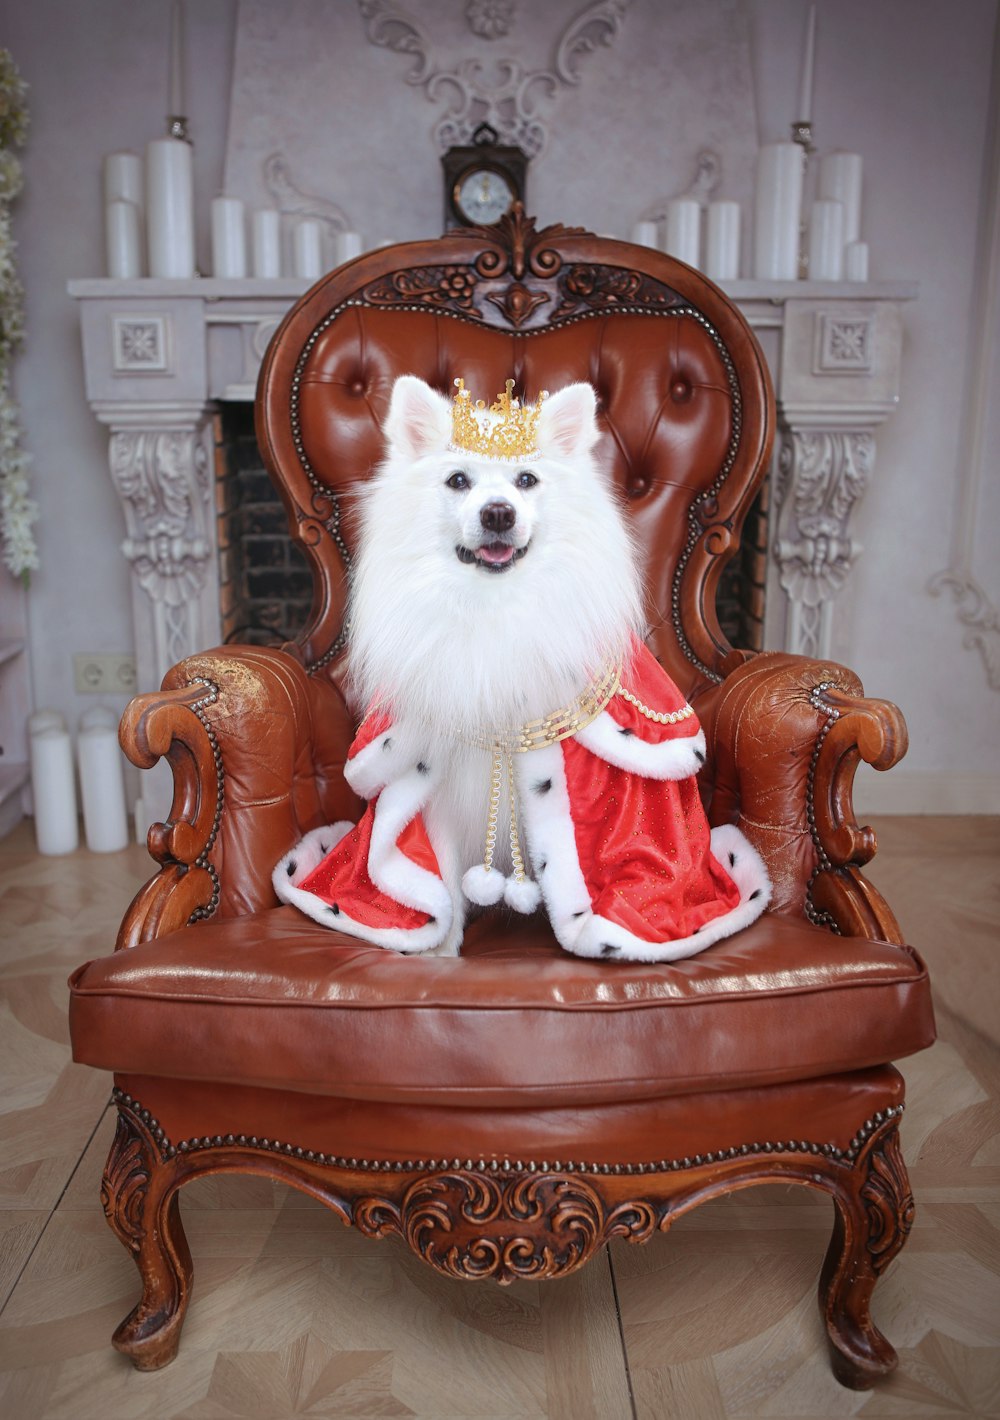 a white dog in a red dress sitting on a brown chair